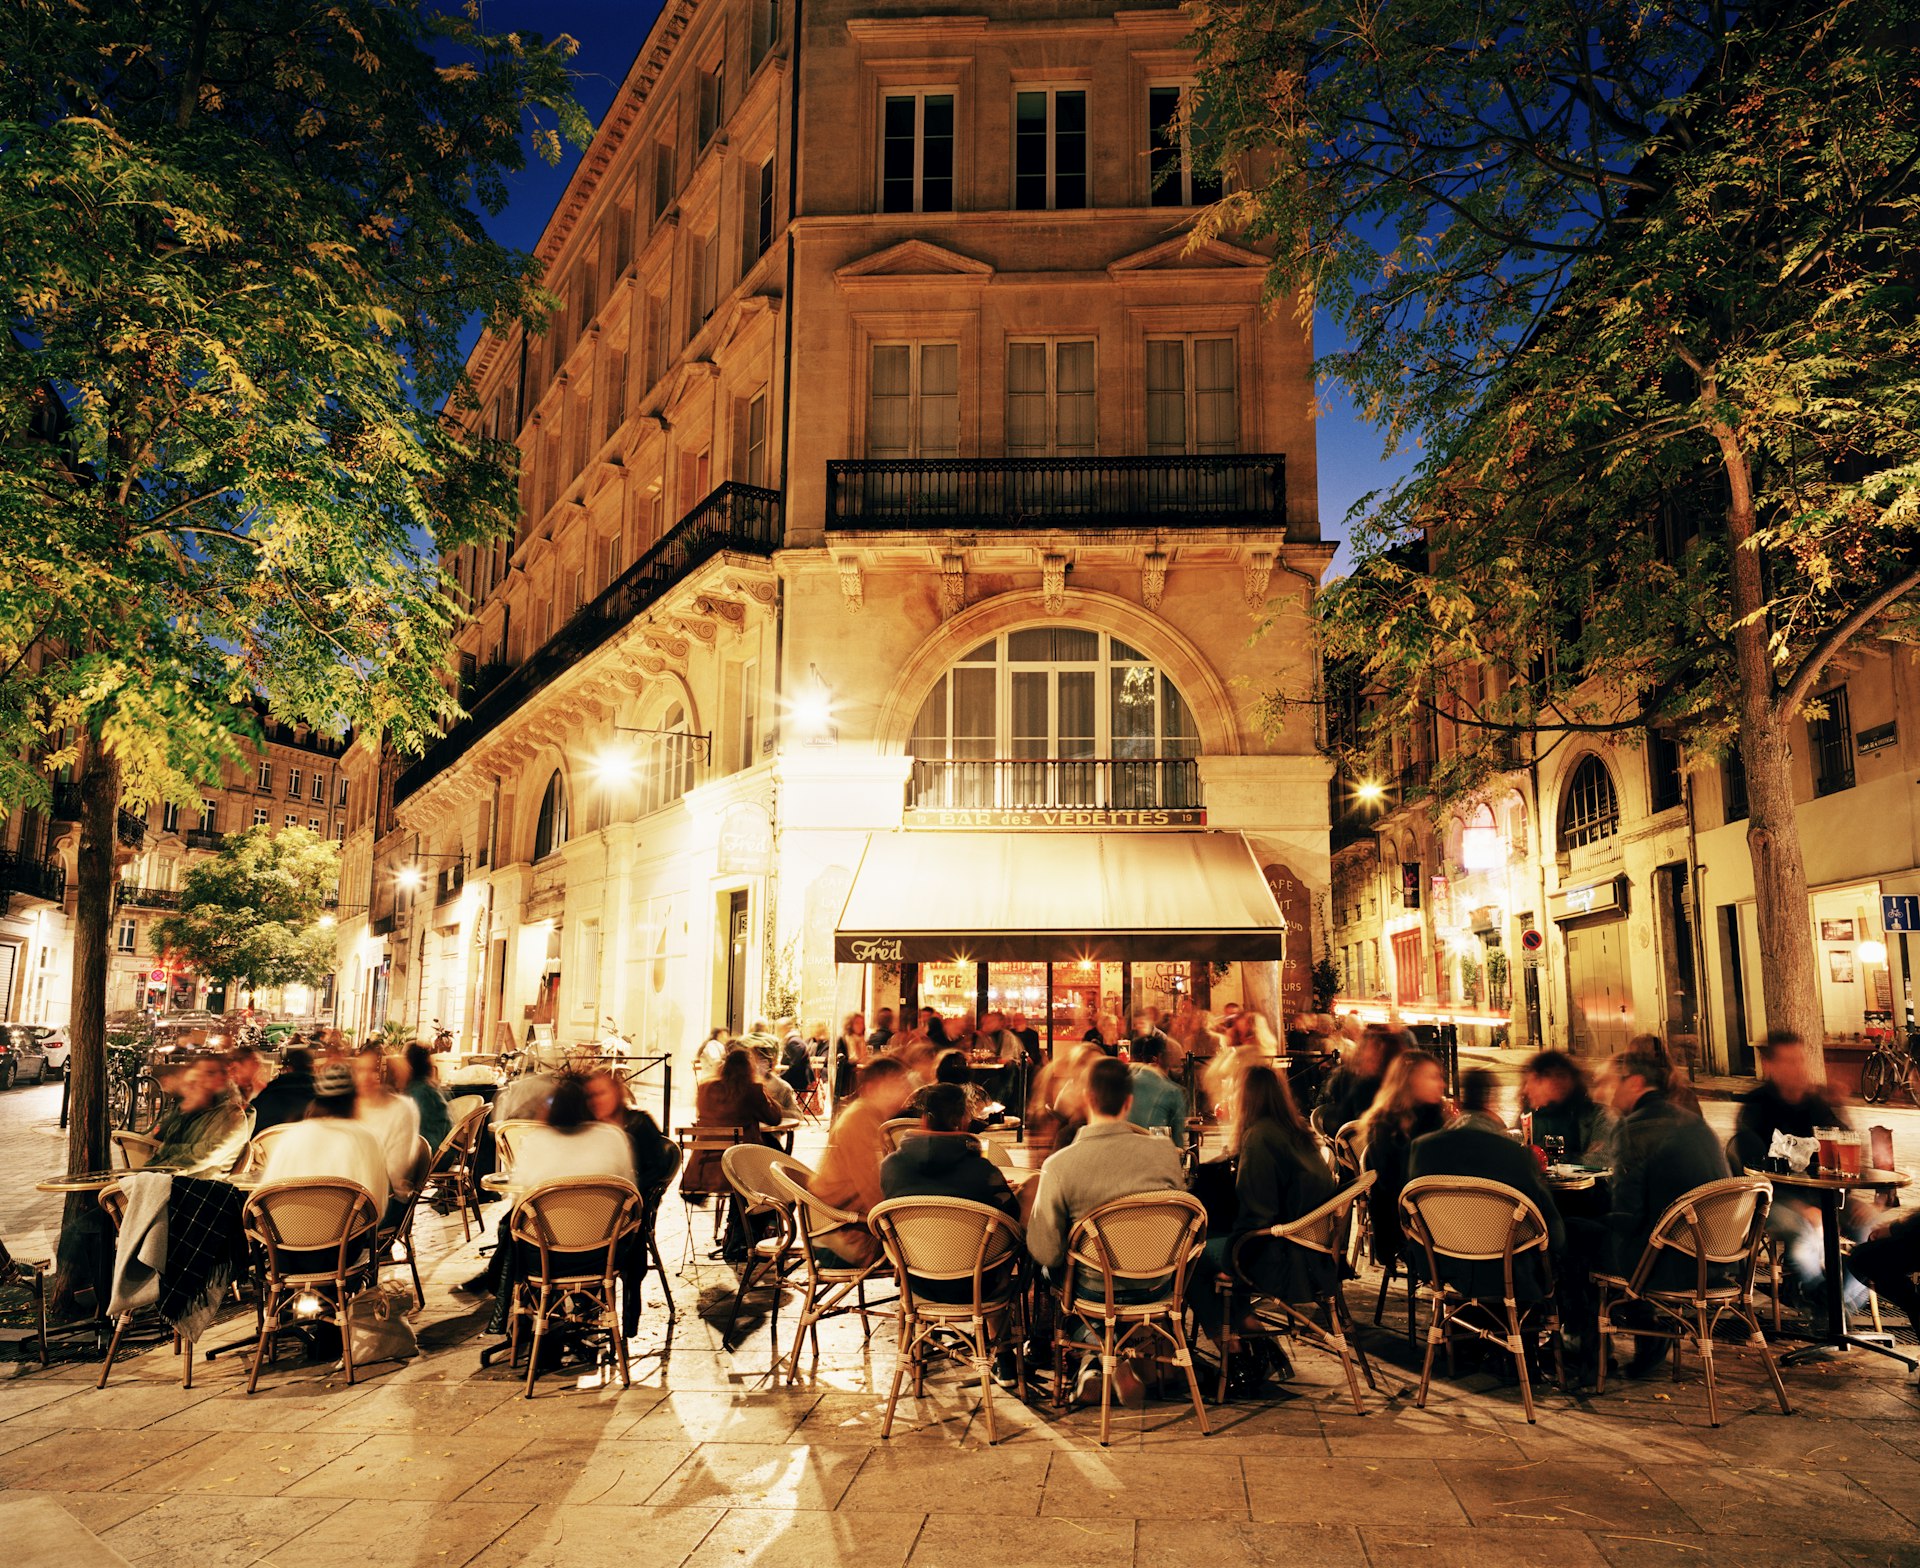 An outdoor cafe scene at night with patrons seated at tables under the glow of street lamps and a warmly lit building façade, creating a lively evening atmosphere